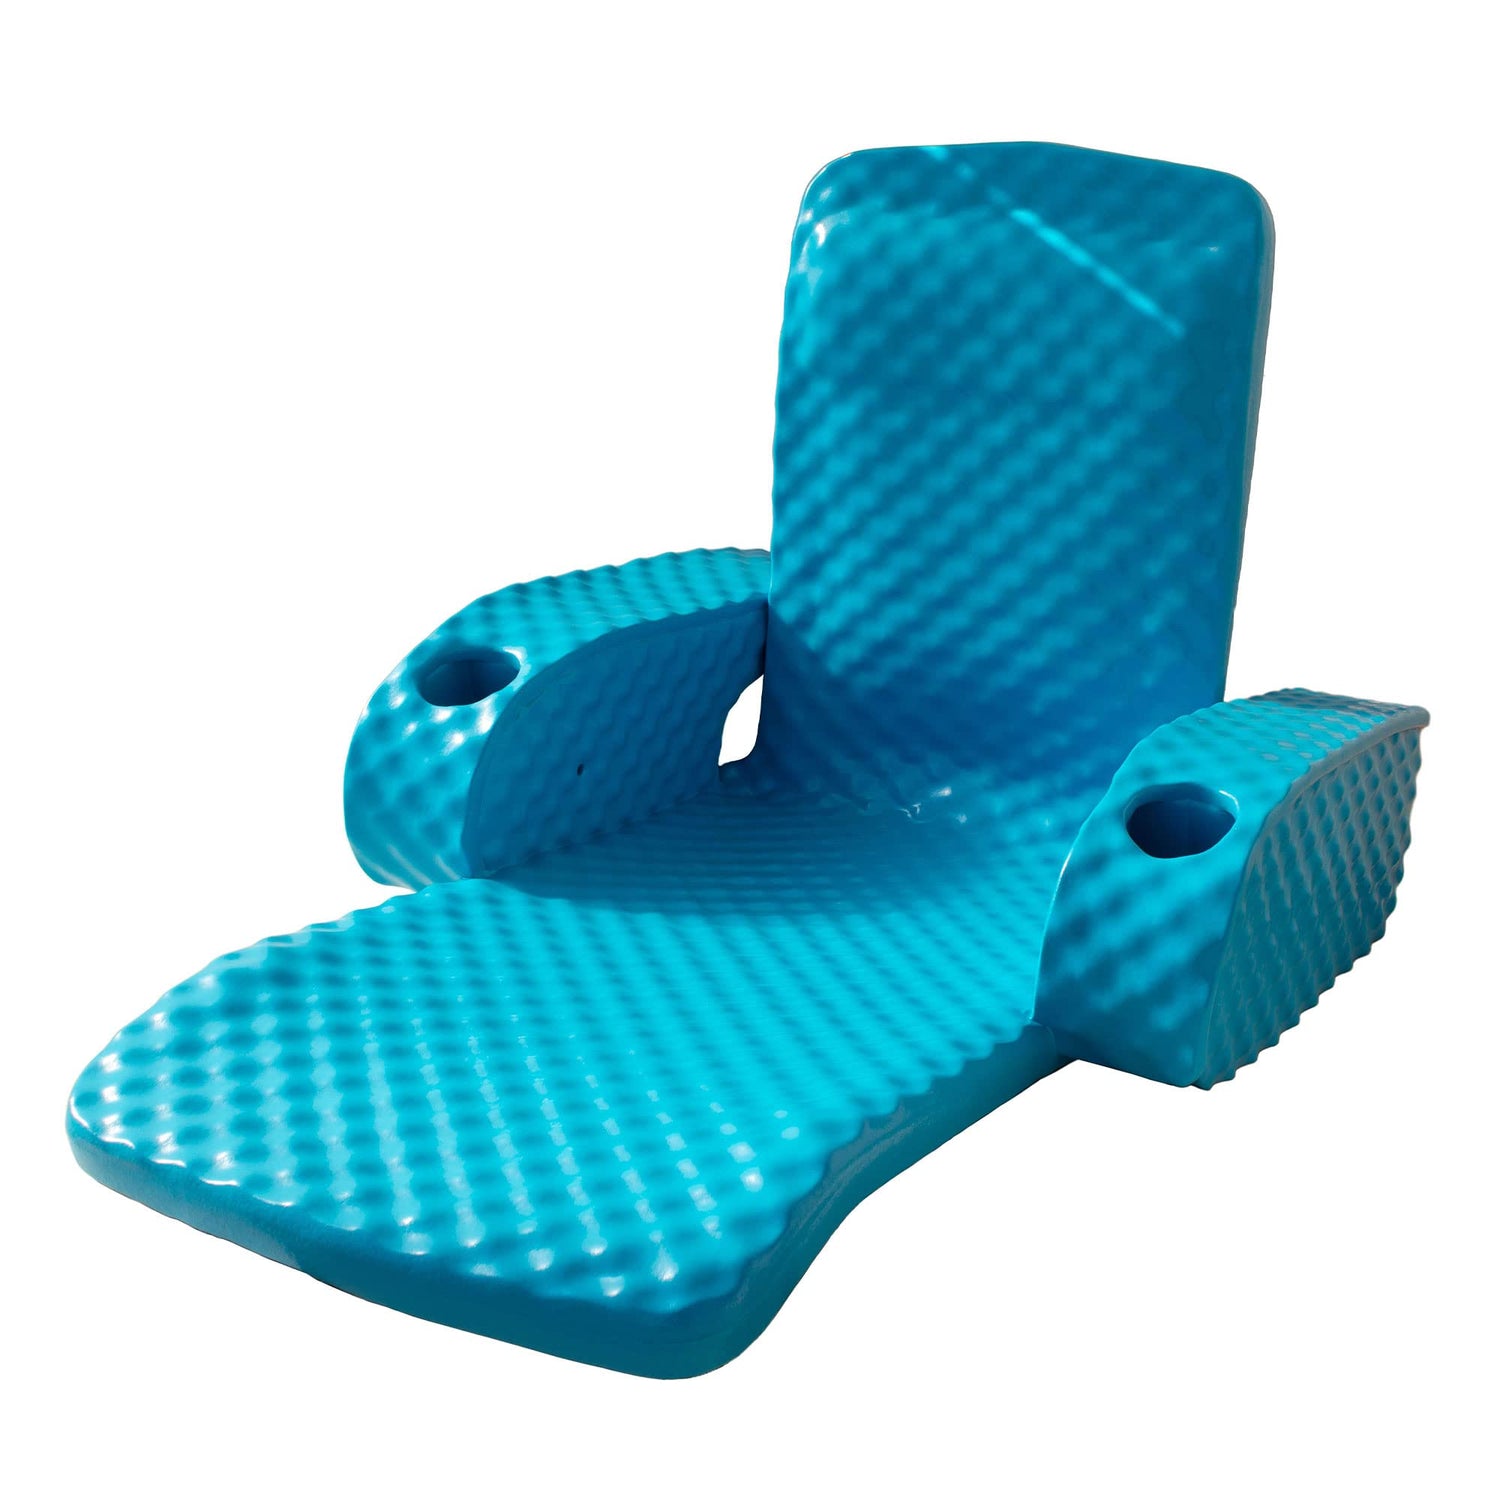 TRC Recreation Folding Baja II Lounger Foam Swimming Pool Float, Portable Floating Lounger with 2 Cup Holders for Beach Essentials, Tropical Teal